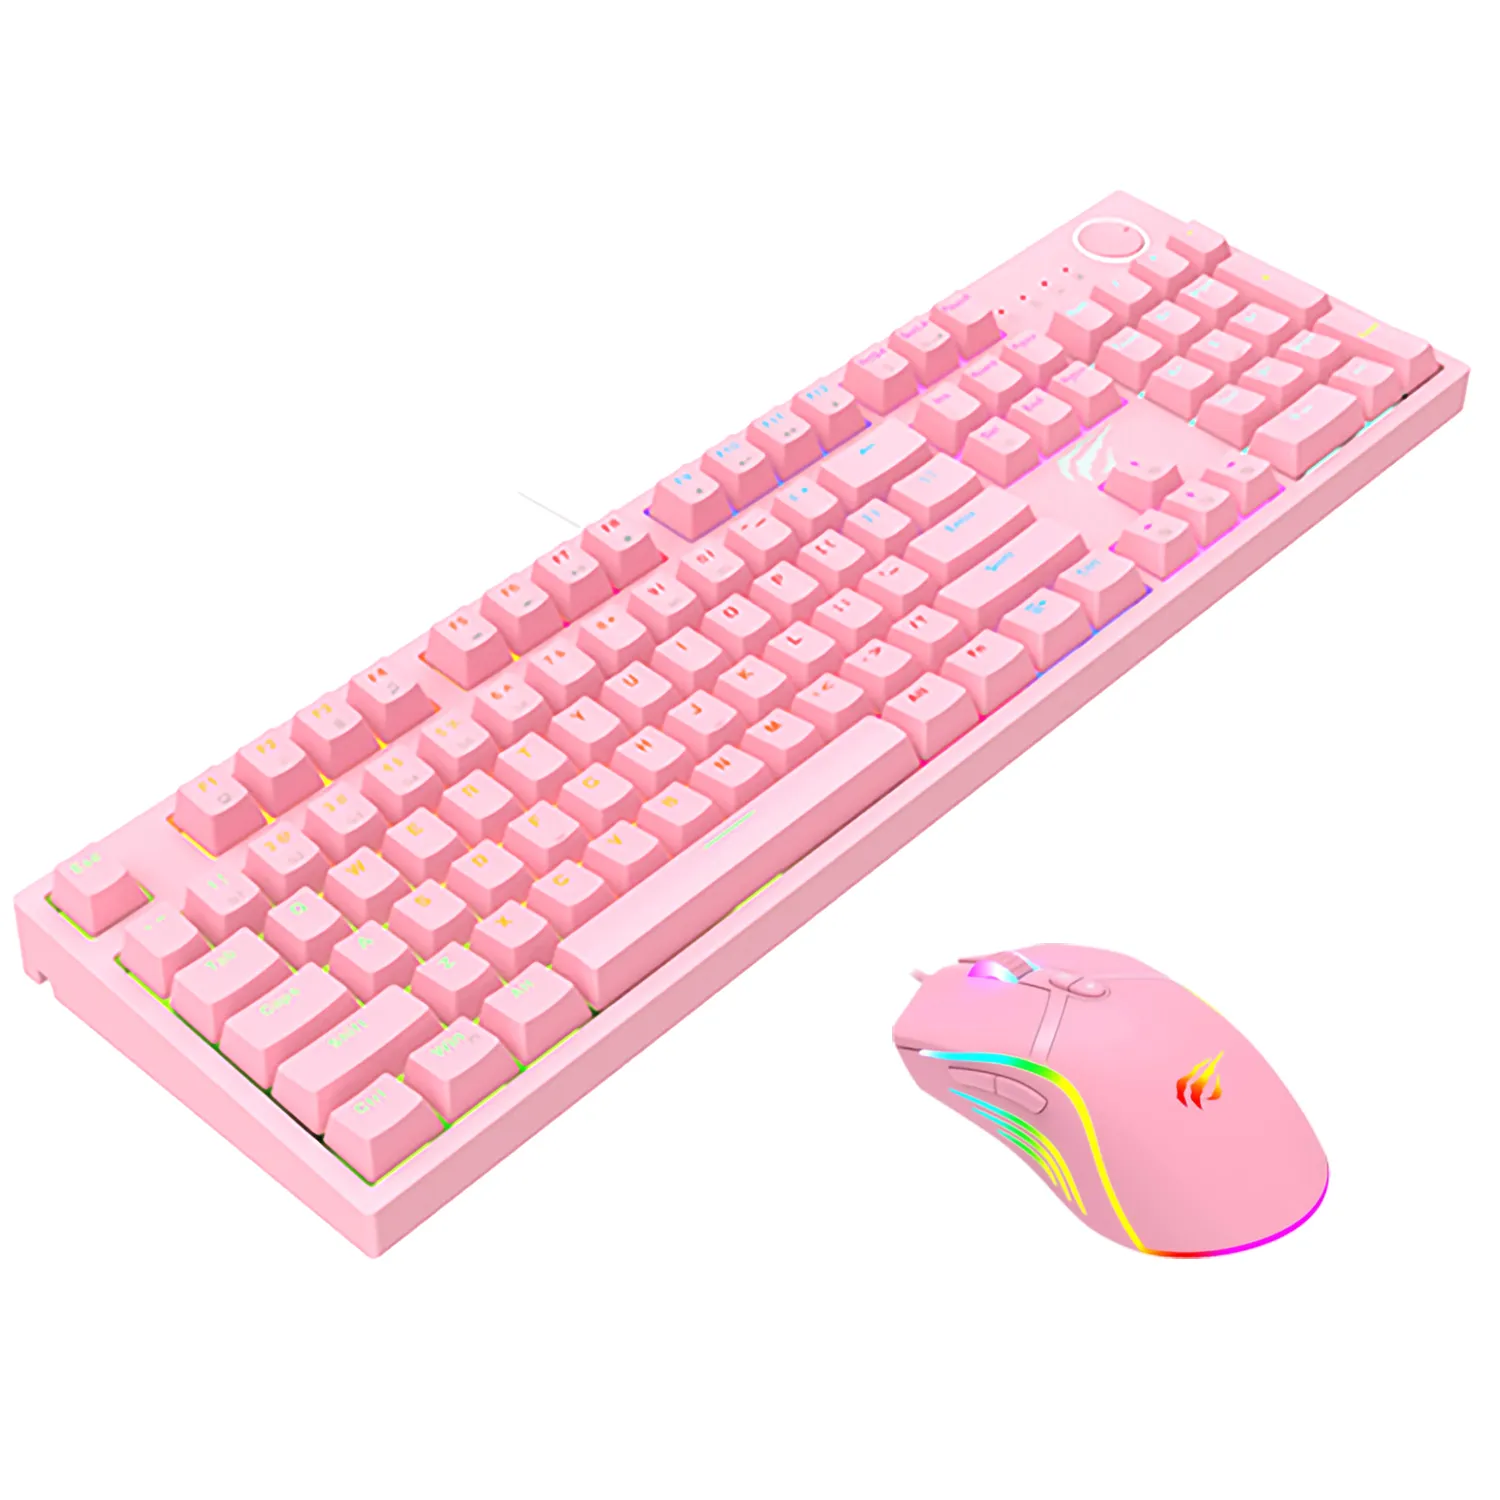 Combo Teclado Mecánico y Mouse Gamer Rosa Havit KB871L y MS1026 Pink Taboo